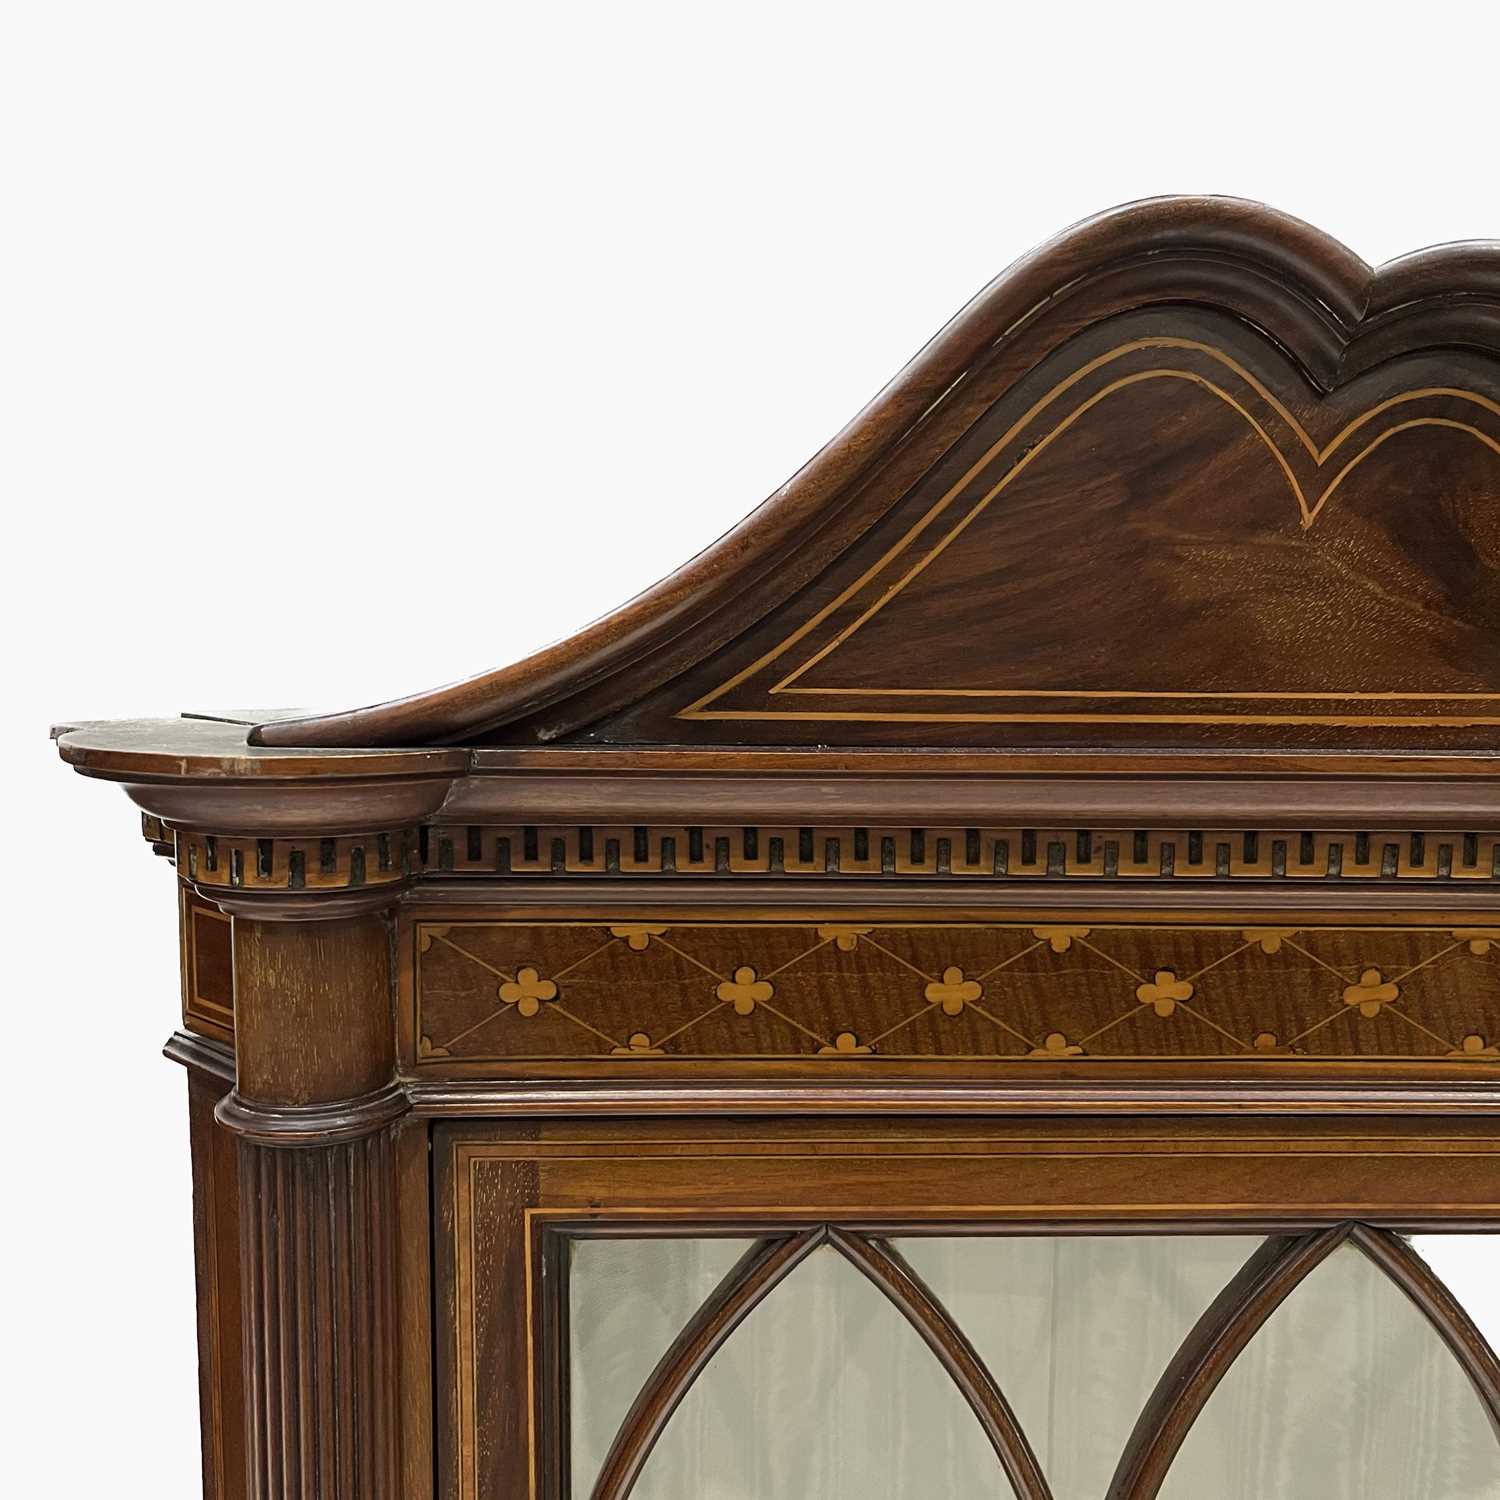 An Edwardian mahogany corner standing vitrine, circa 1910, arched pediment, crossbanded, marquetry - Image 3 of 3